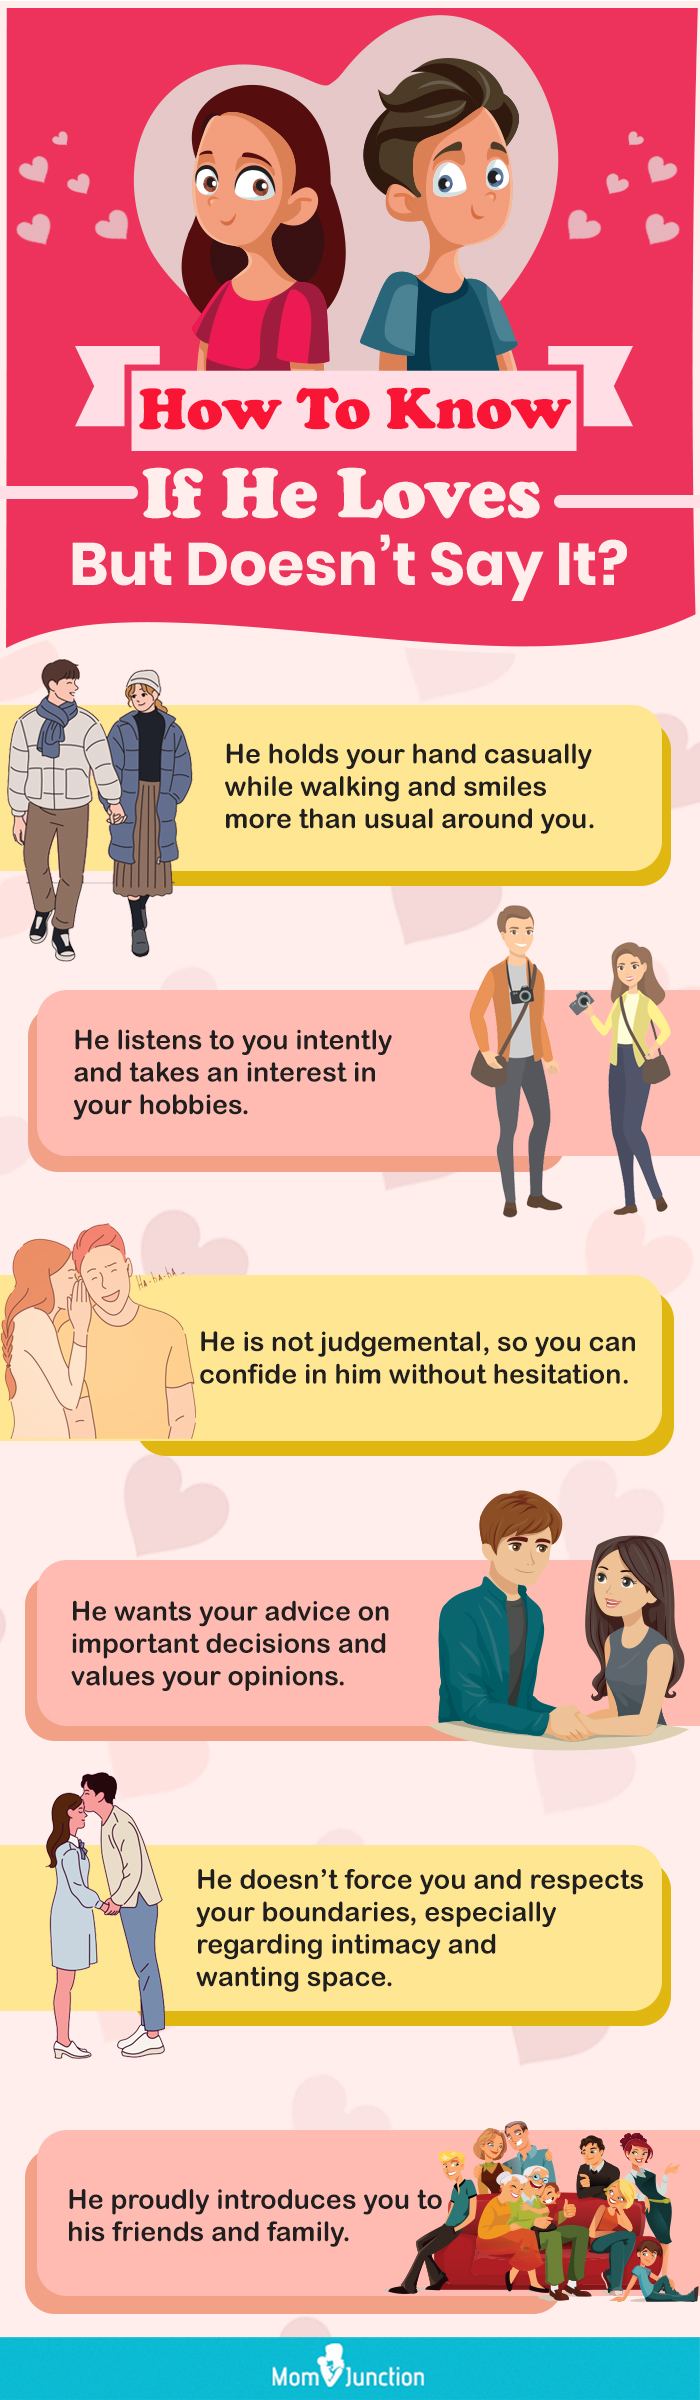 how to know if he loves but doesnt say it [infographic]